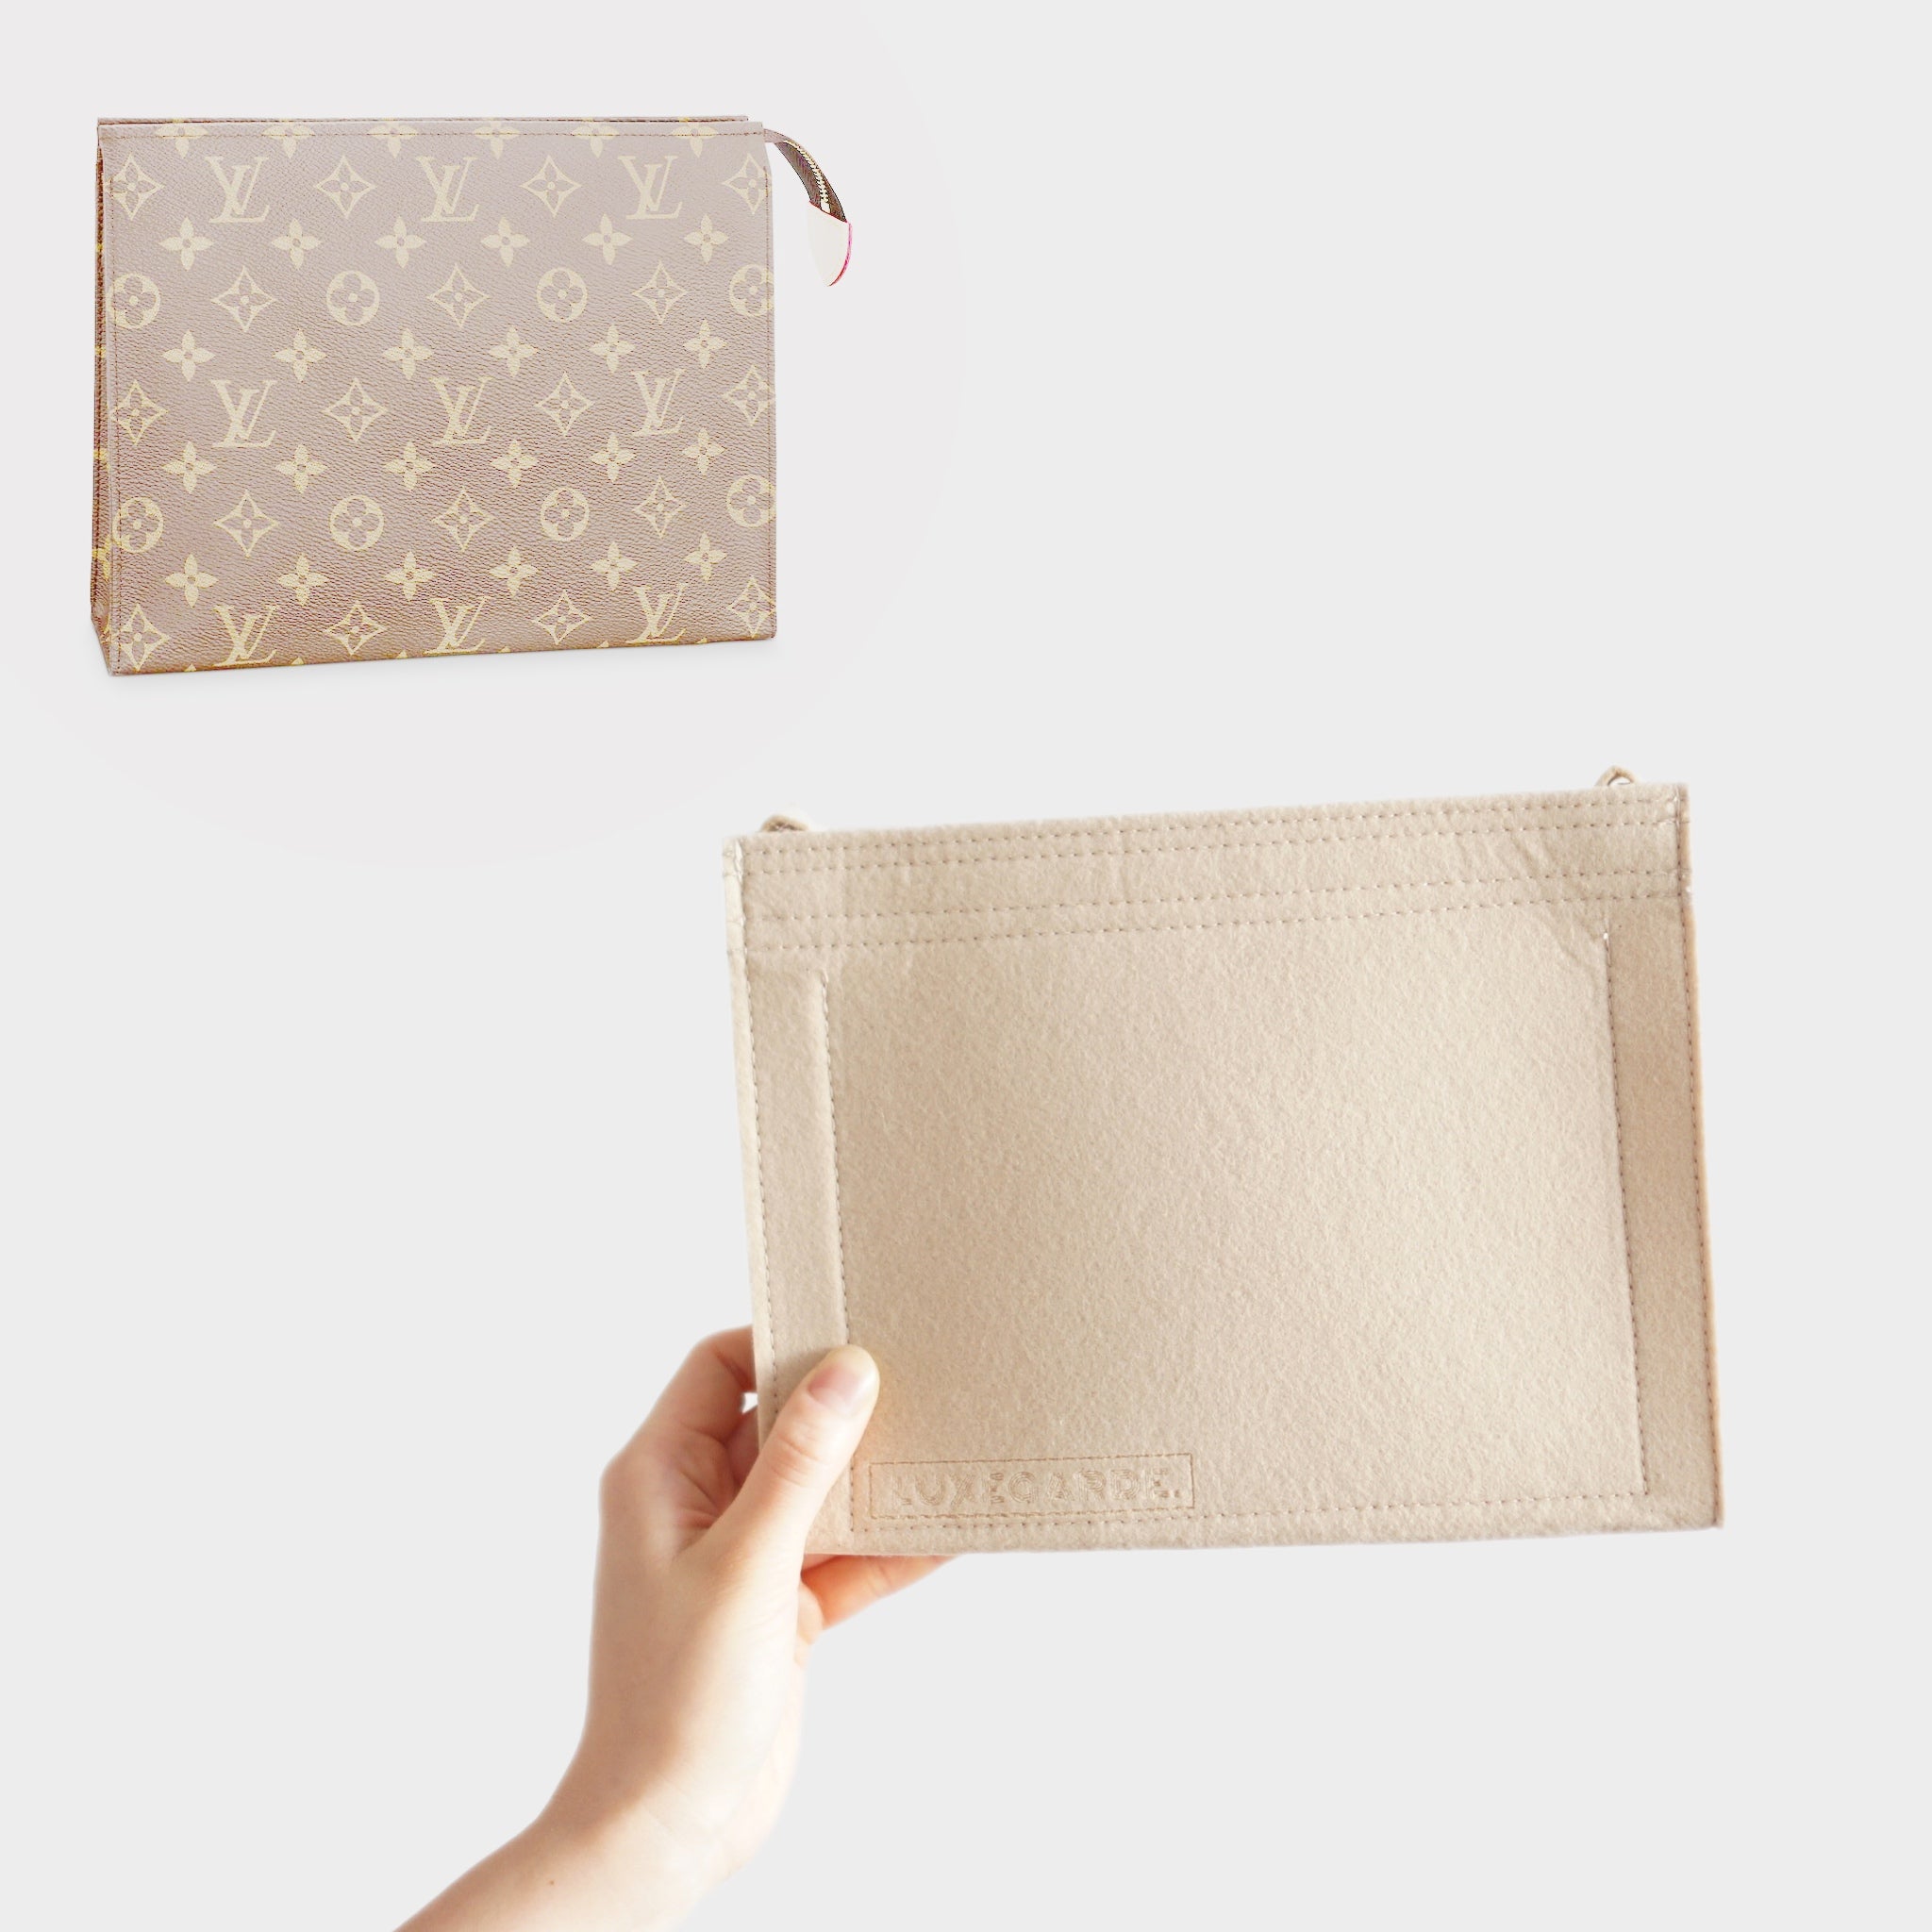 NEWS Louis Vuitton Brings Back the Toiletry Pouch with a Twist  PurseBop